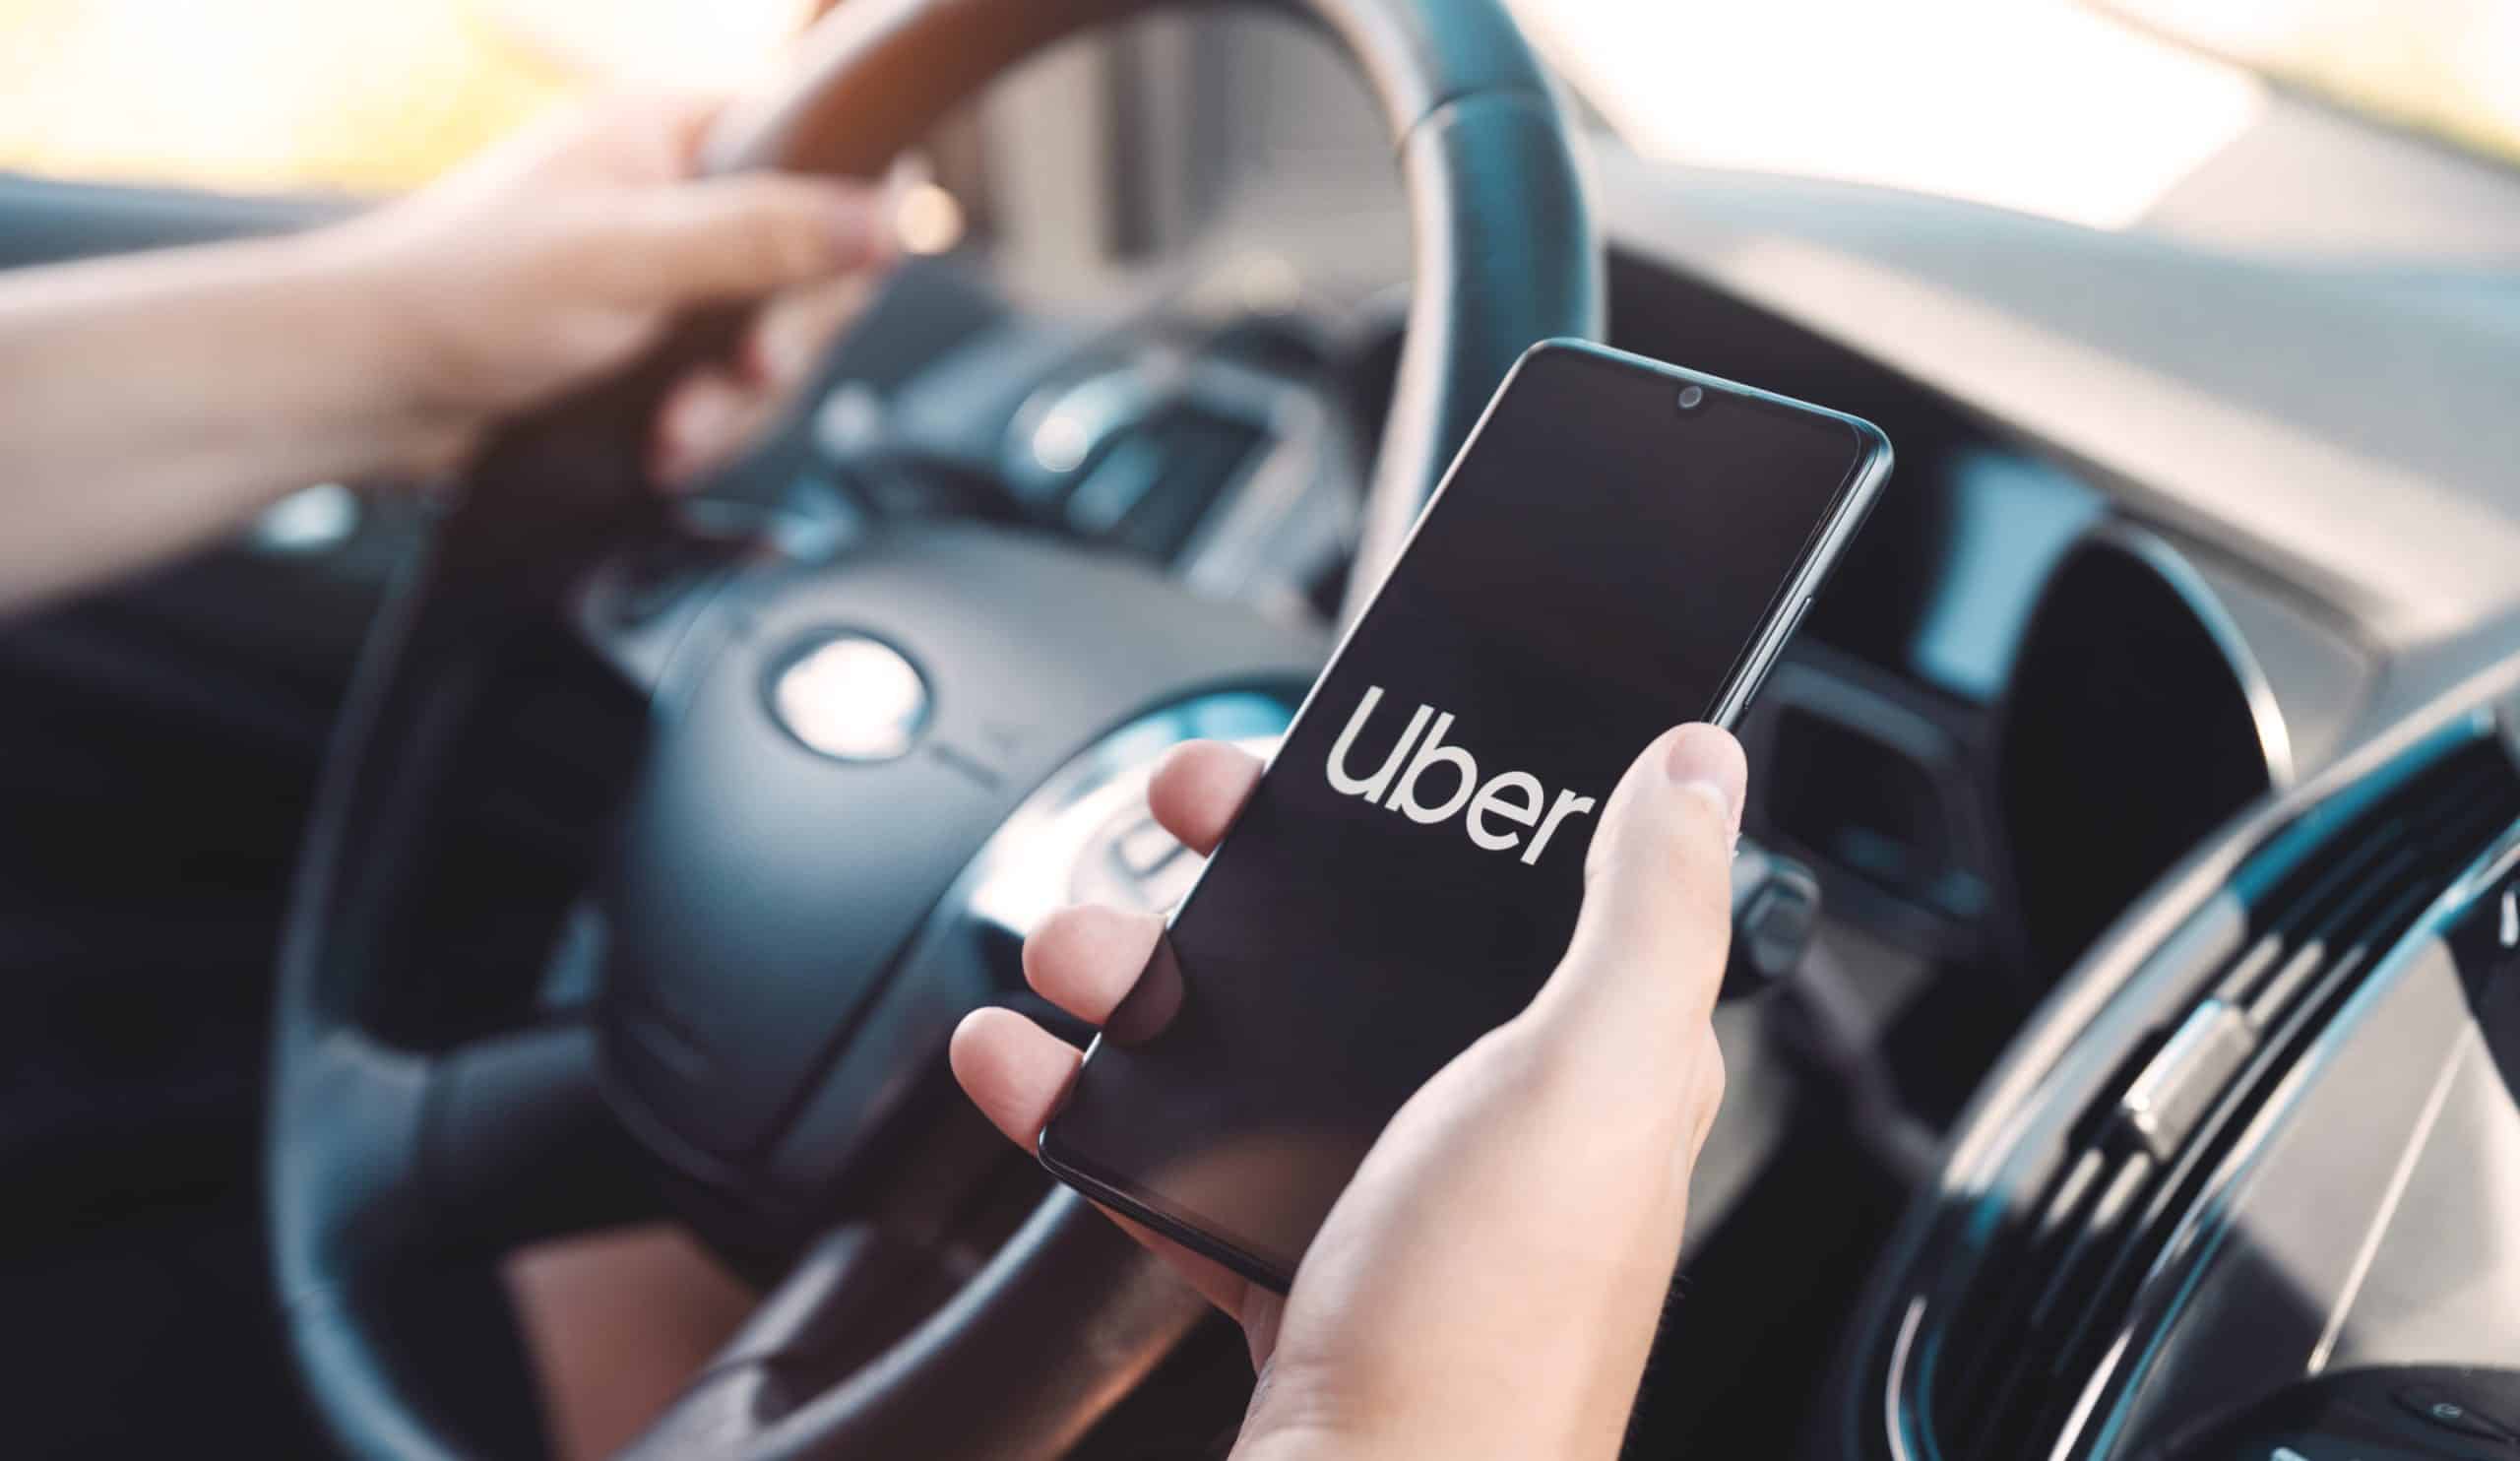 Uber Driver in a car - Uber Accident 5 Essential Facts